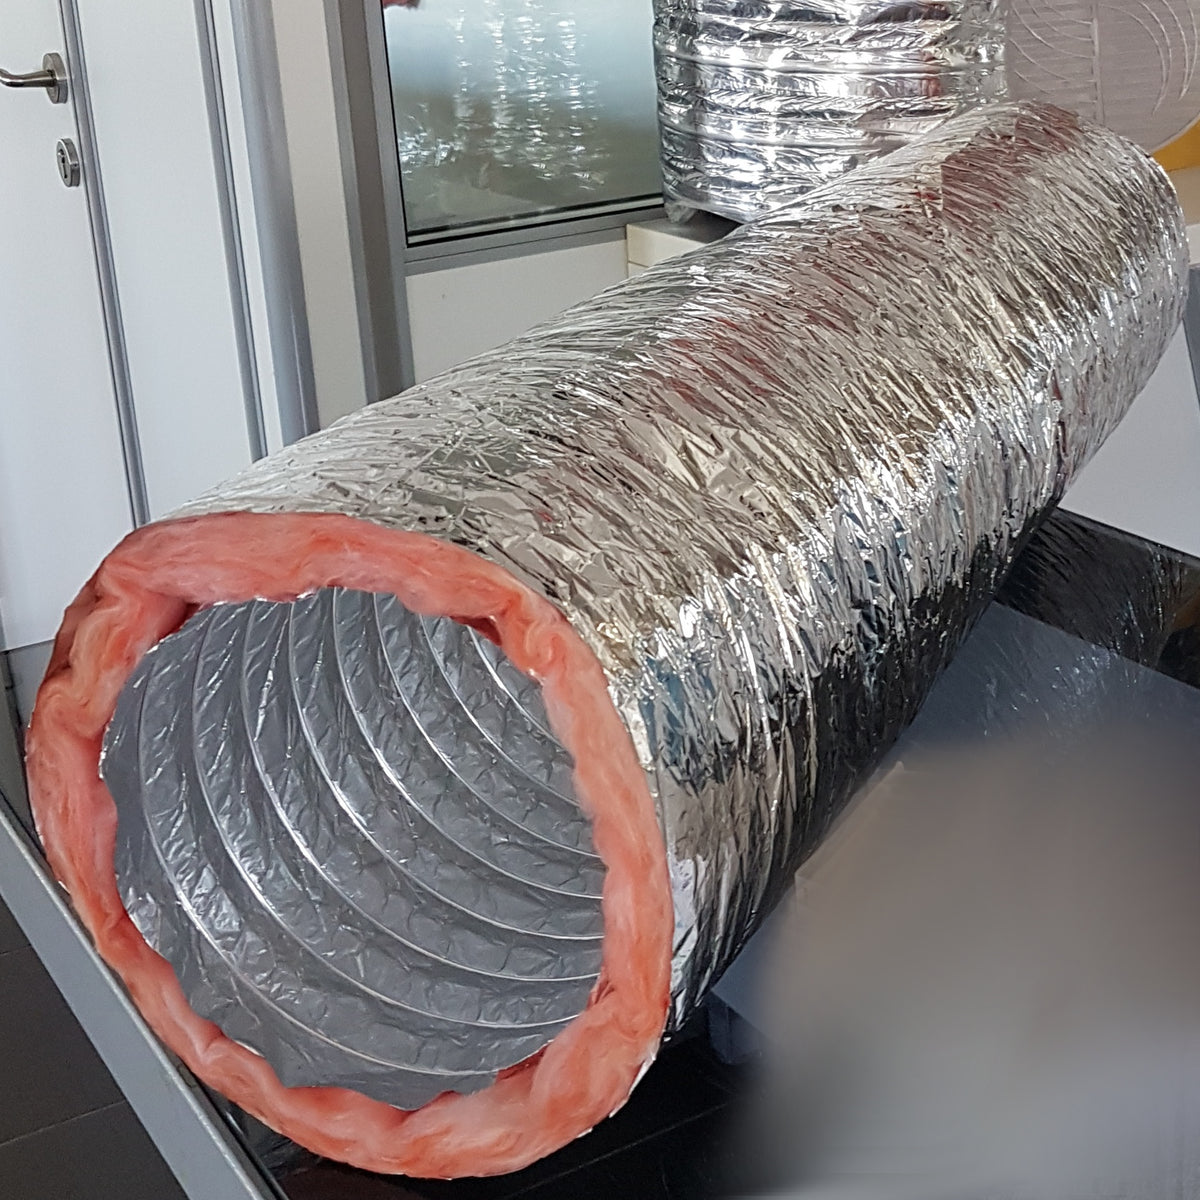 5&quot; Inch Aluminum Hose Flexible Insulated R-8.0 Air Duct Pipe for Rigid HVAC Flex Ductwork Insulation - 25&#39; Feet Long